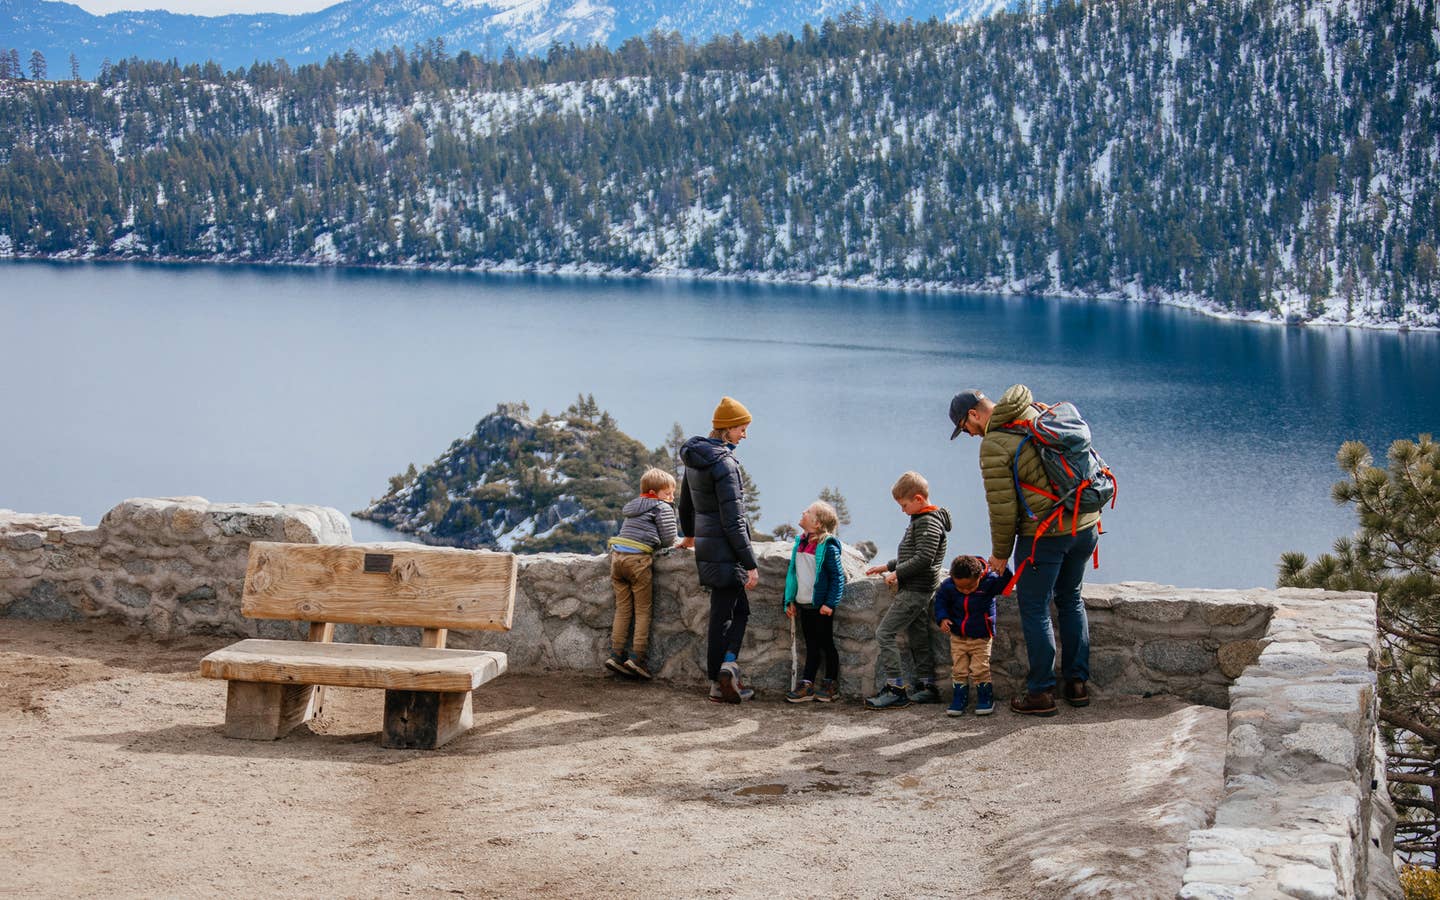 Andrea Rassmussen's family stands overlooking Emerald Bay State Park with a gorgeous forest, mountains and lake as a backdrop.